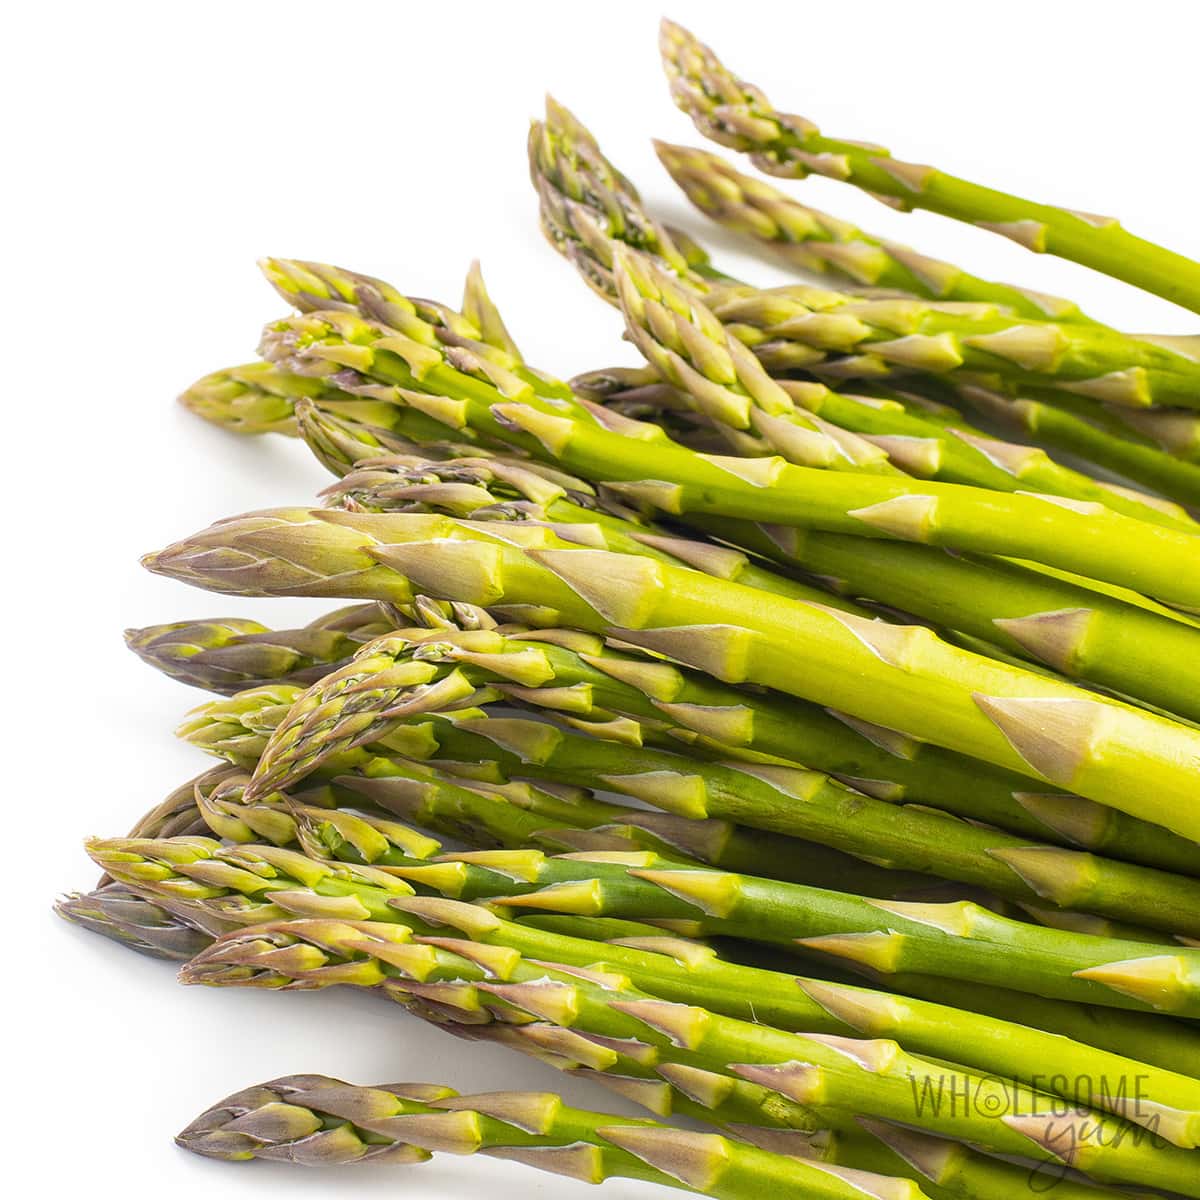 Is asparagus keto? These fresh asparagus spears are low in carbs.